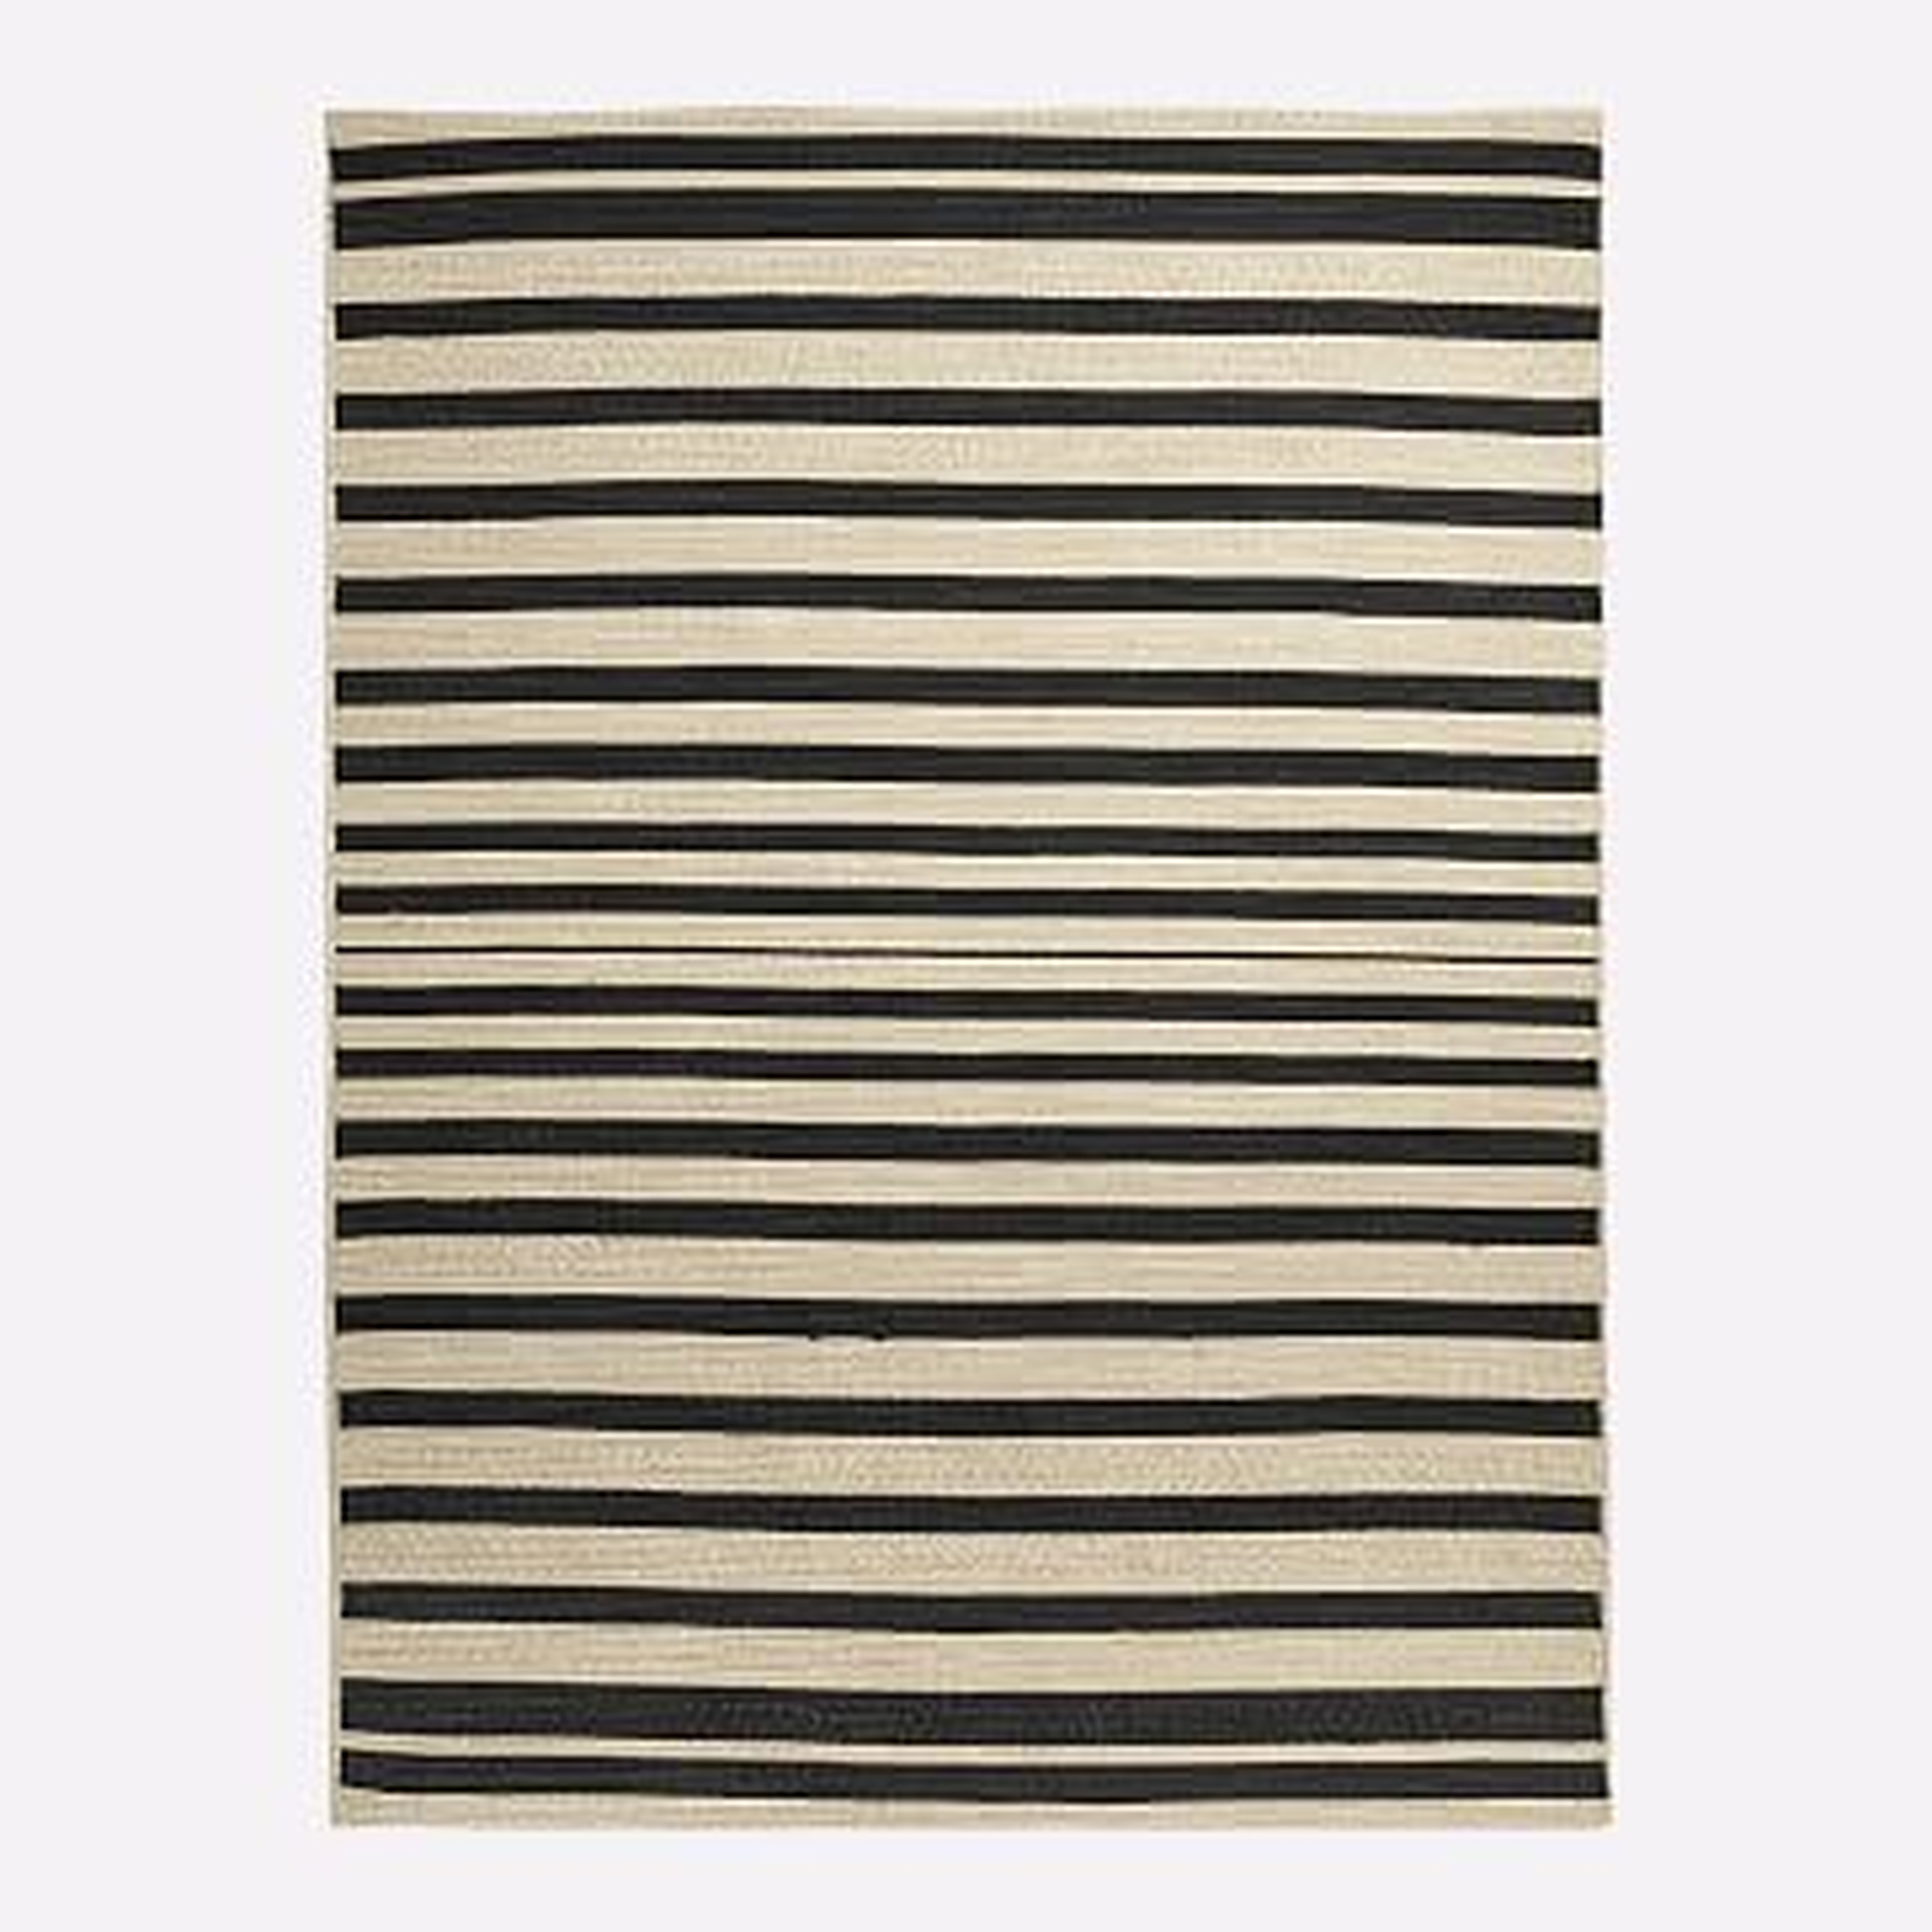 Woven Cable Stripe All Weat Rug, 8'x10', Black - West Elm